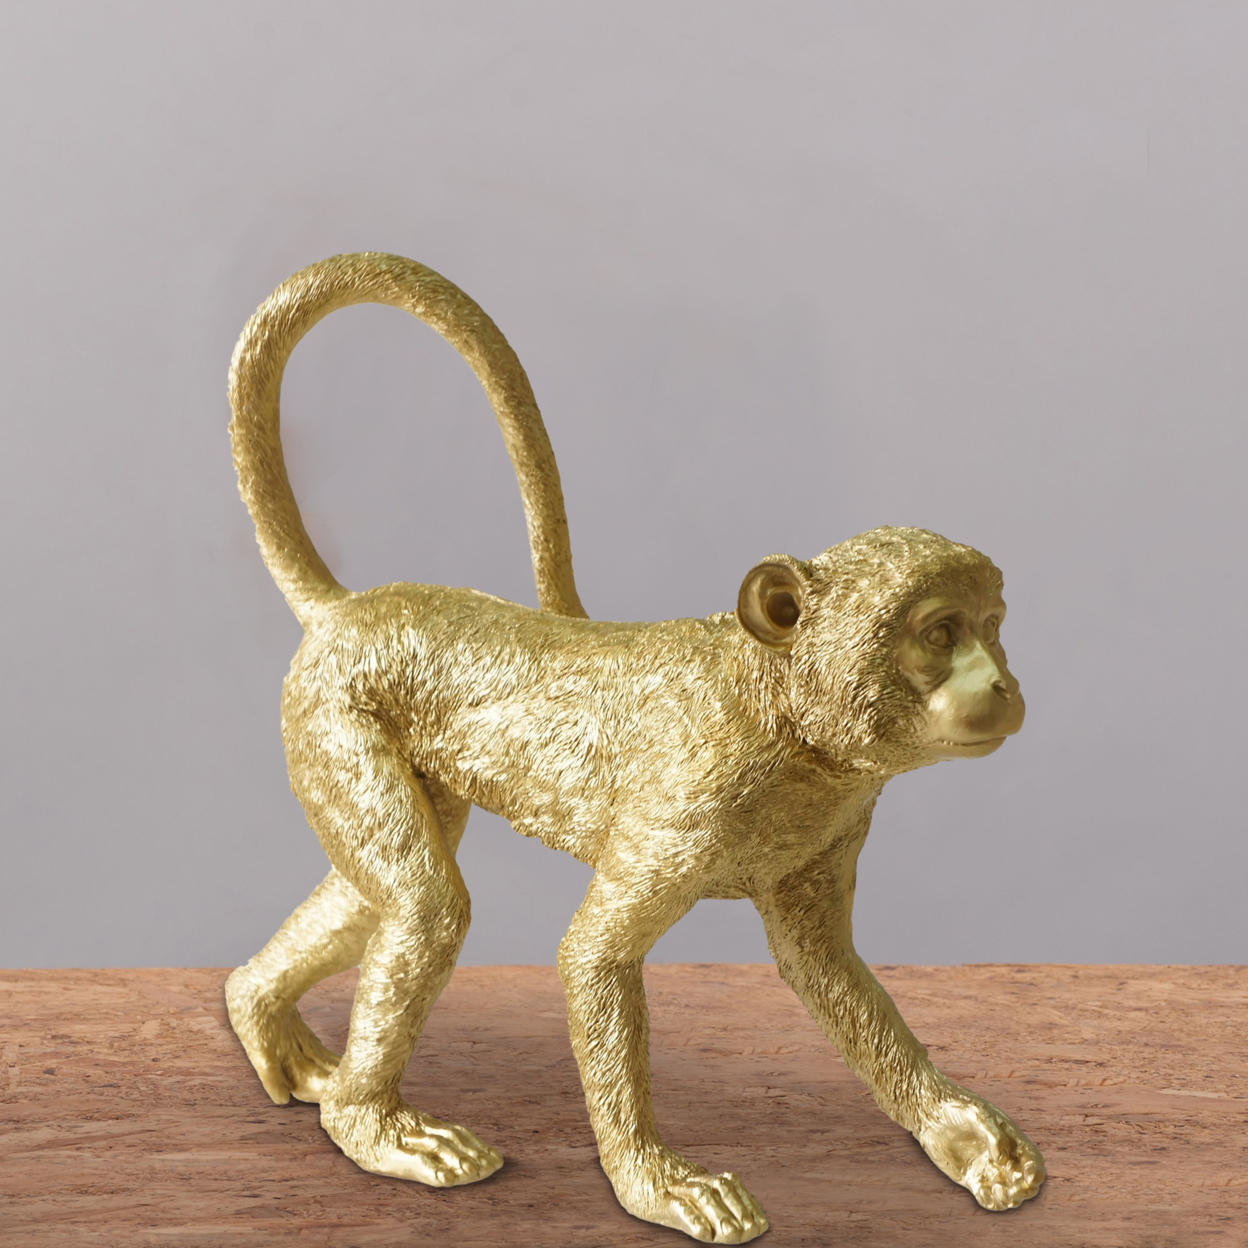 Polyresin Standing Monkey Accent Figurine With Fur Like Texture, Gold, Saltoro Sherpi